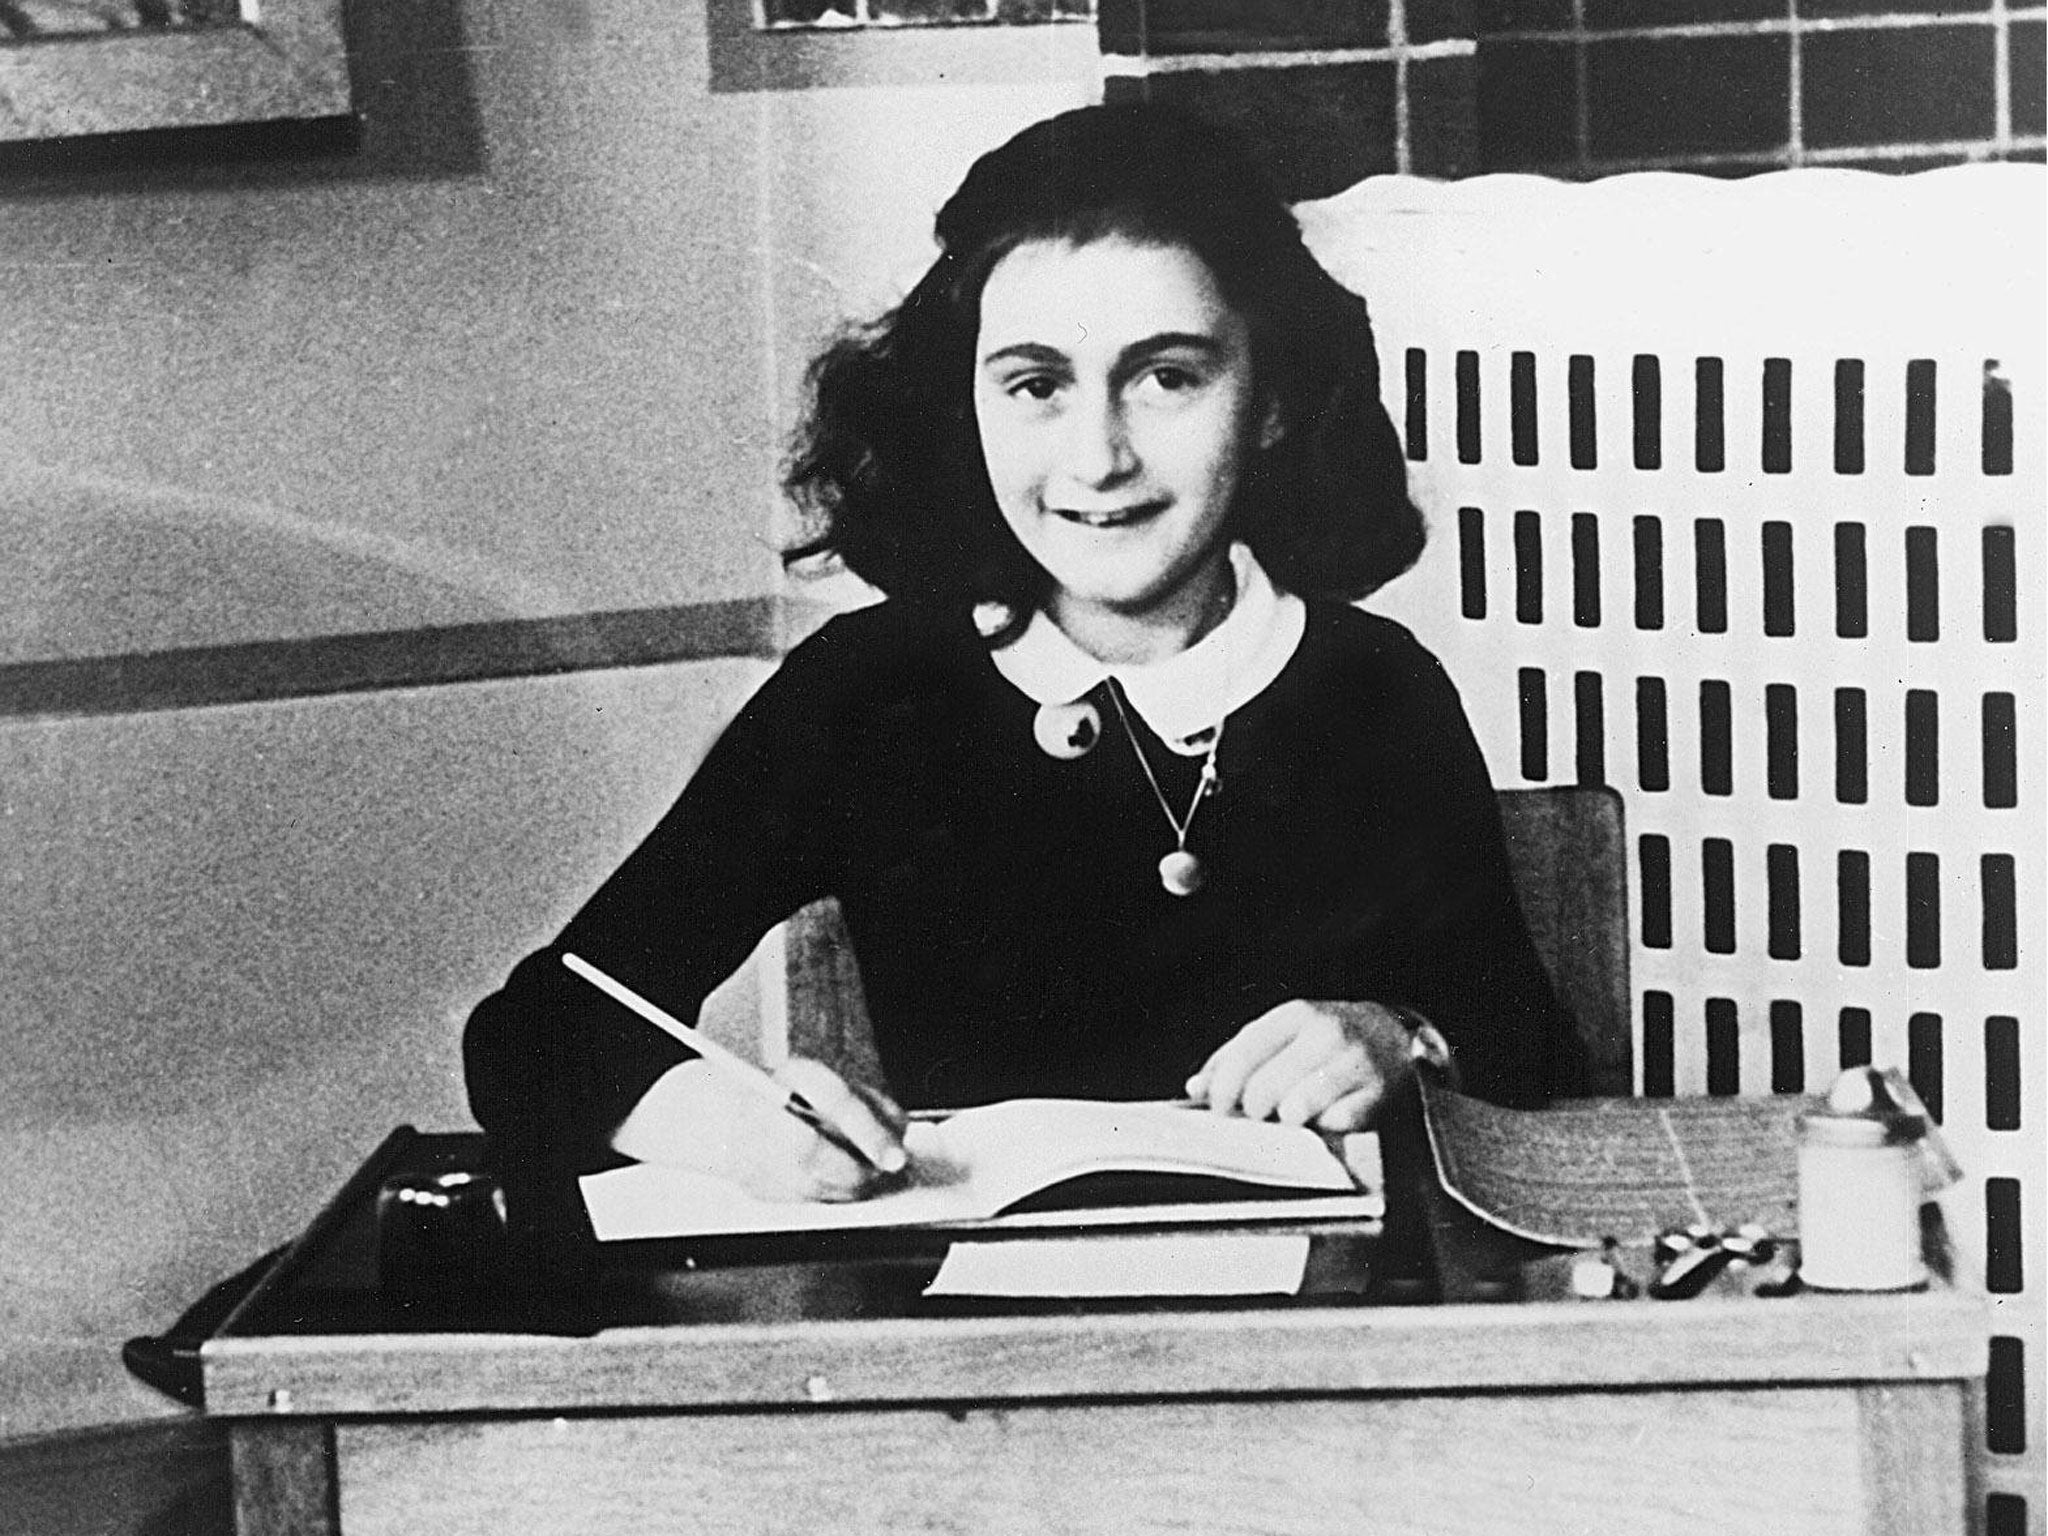 Anne Frank writing in her diary in the 1940s